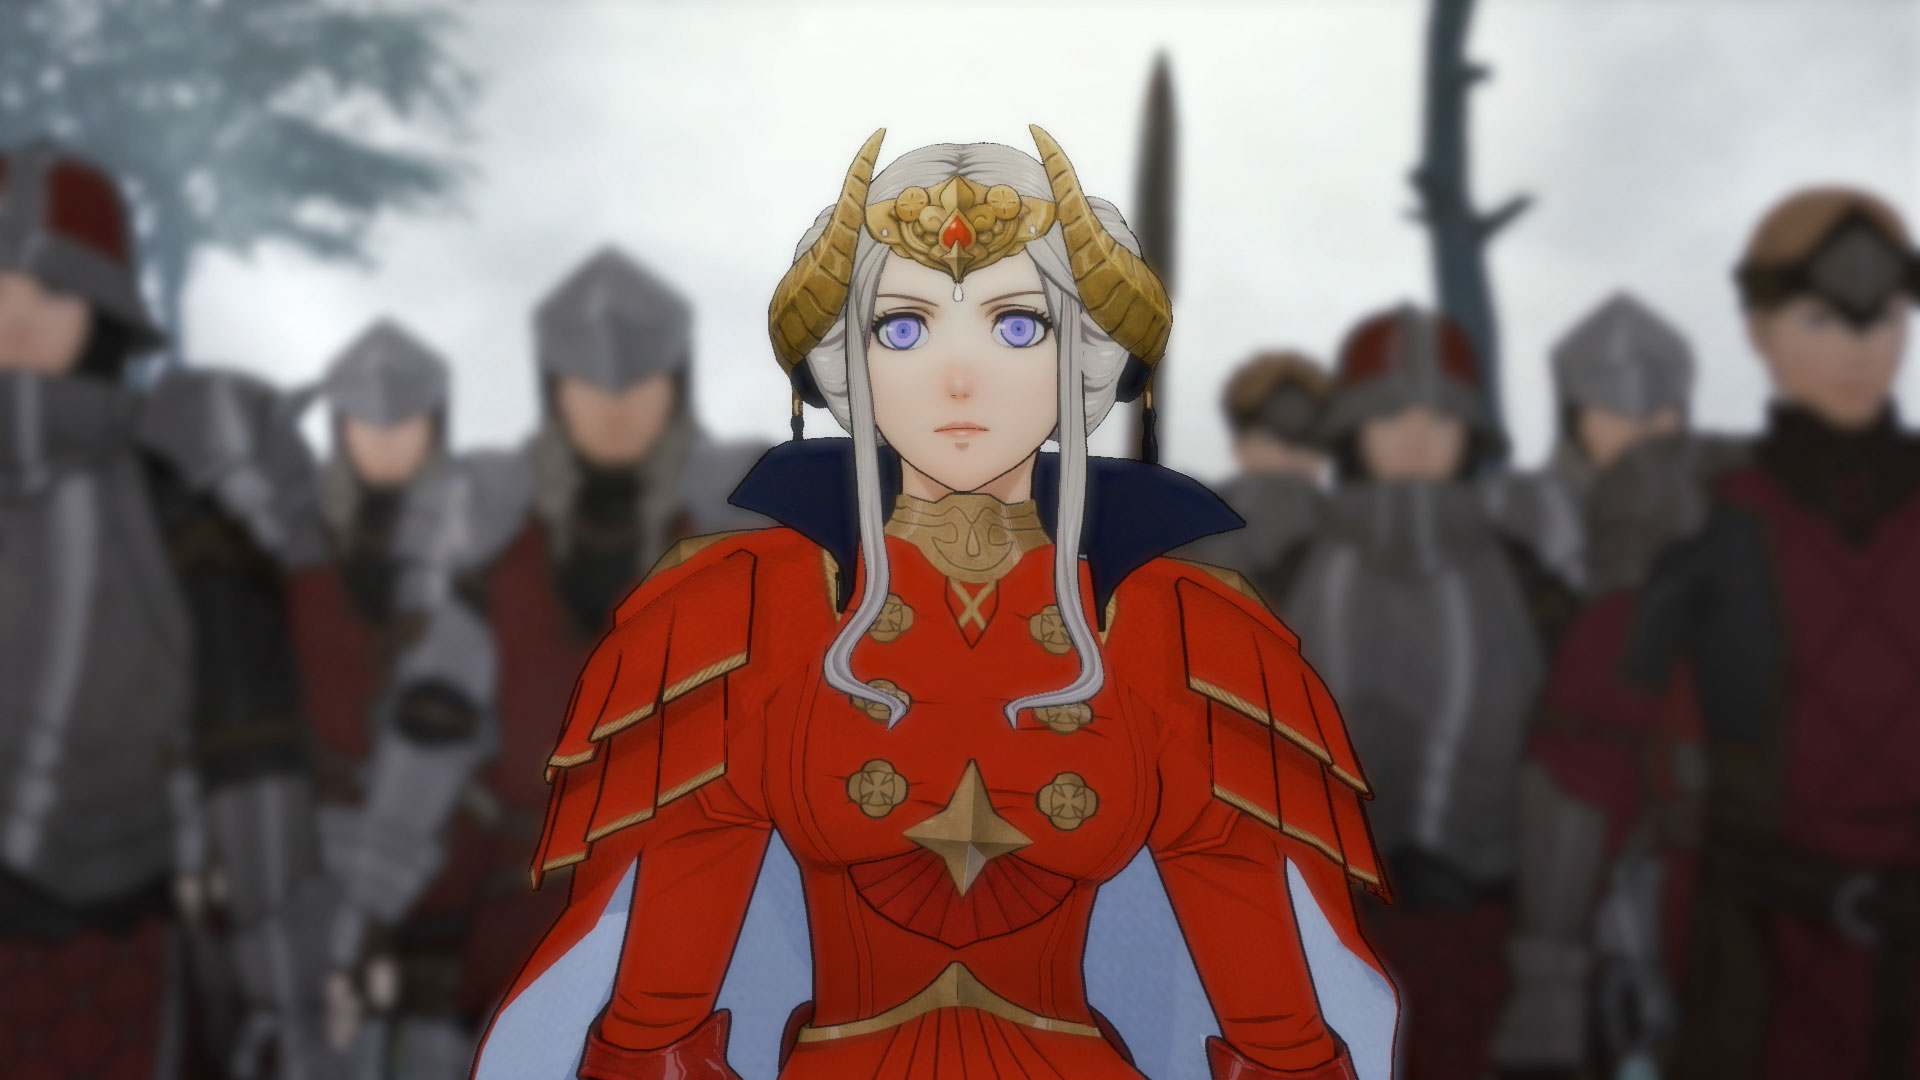 Image result for armored lord edelgard